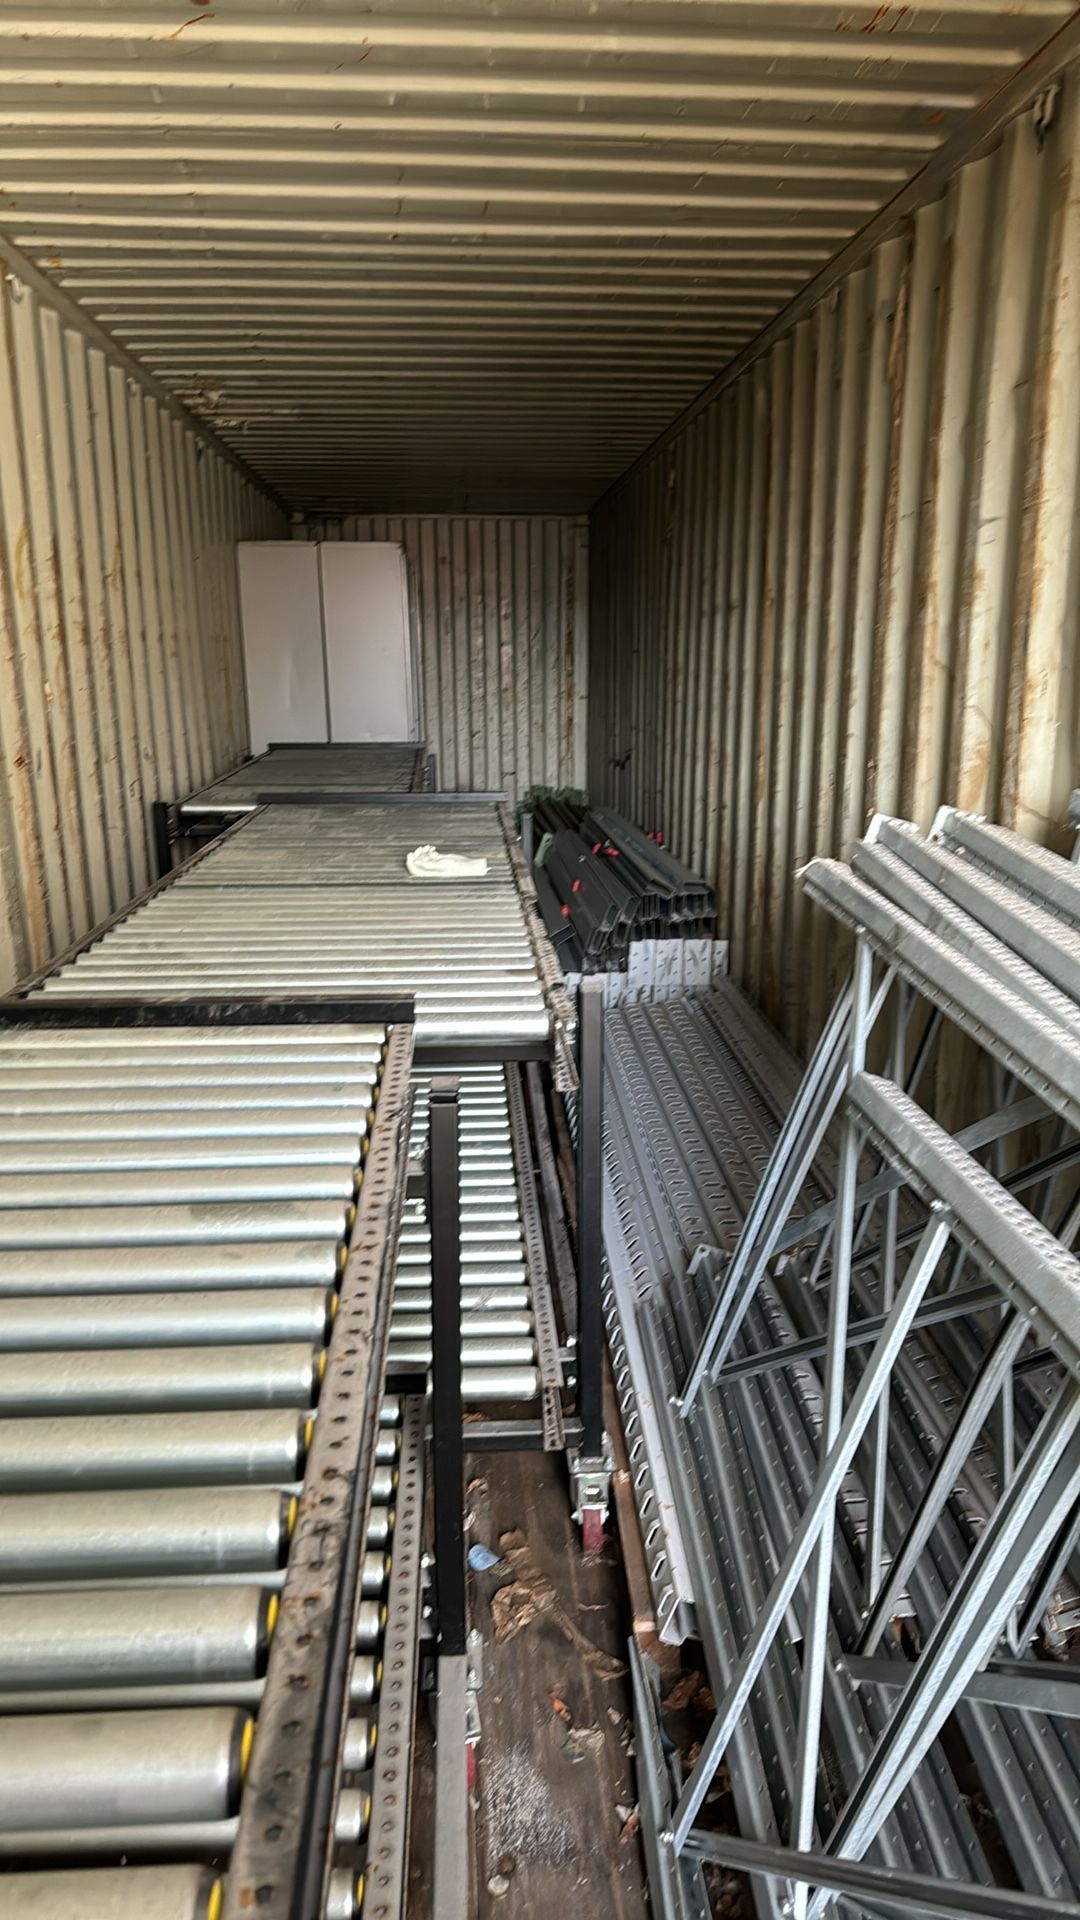 Shipping container, 58 (8548 8519) - Image 2 of 2